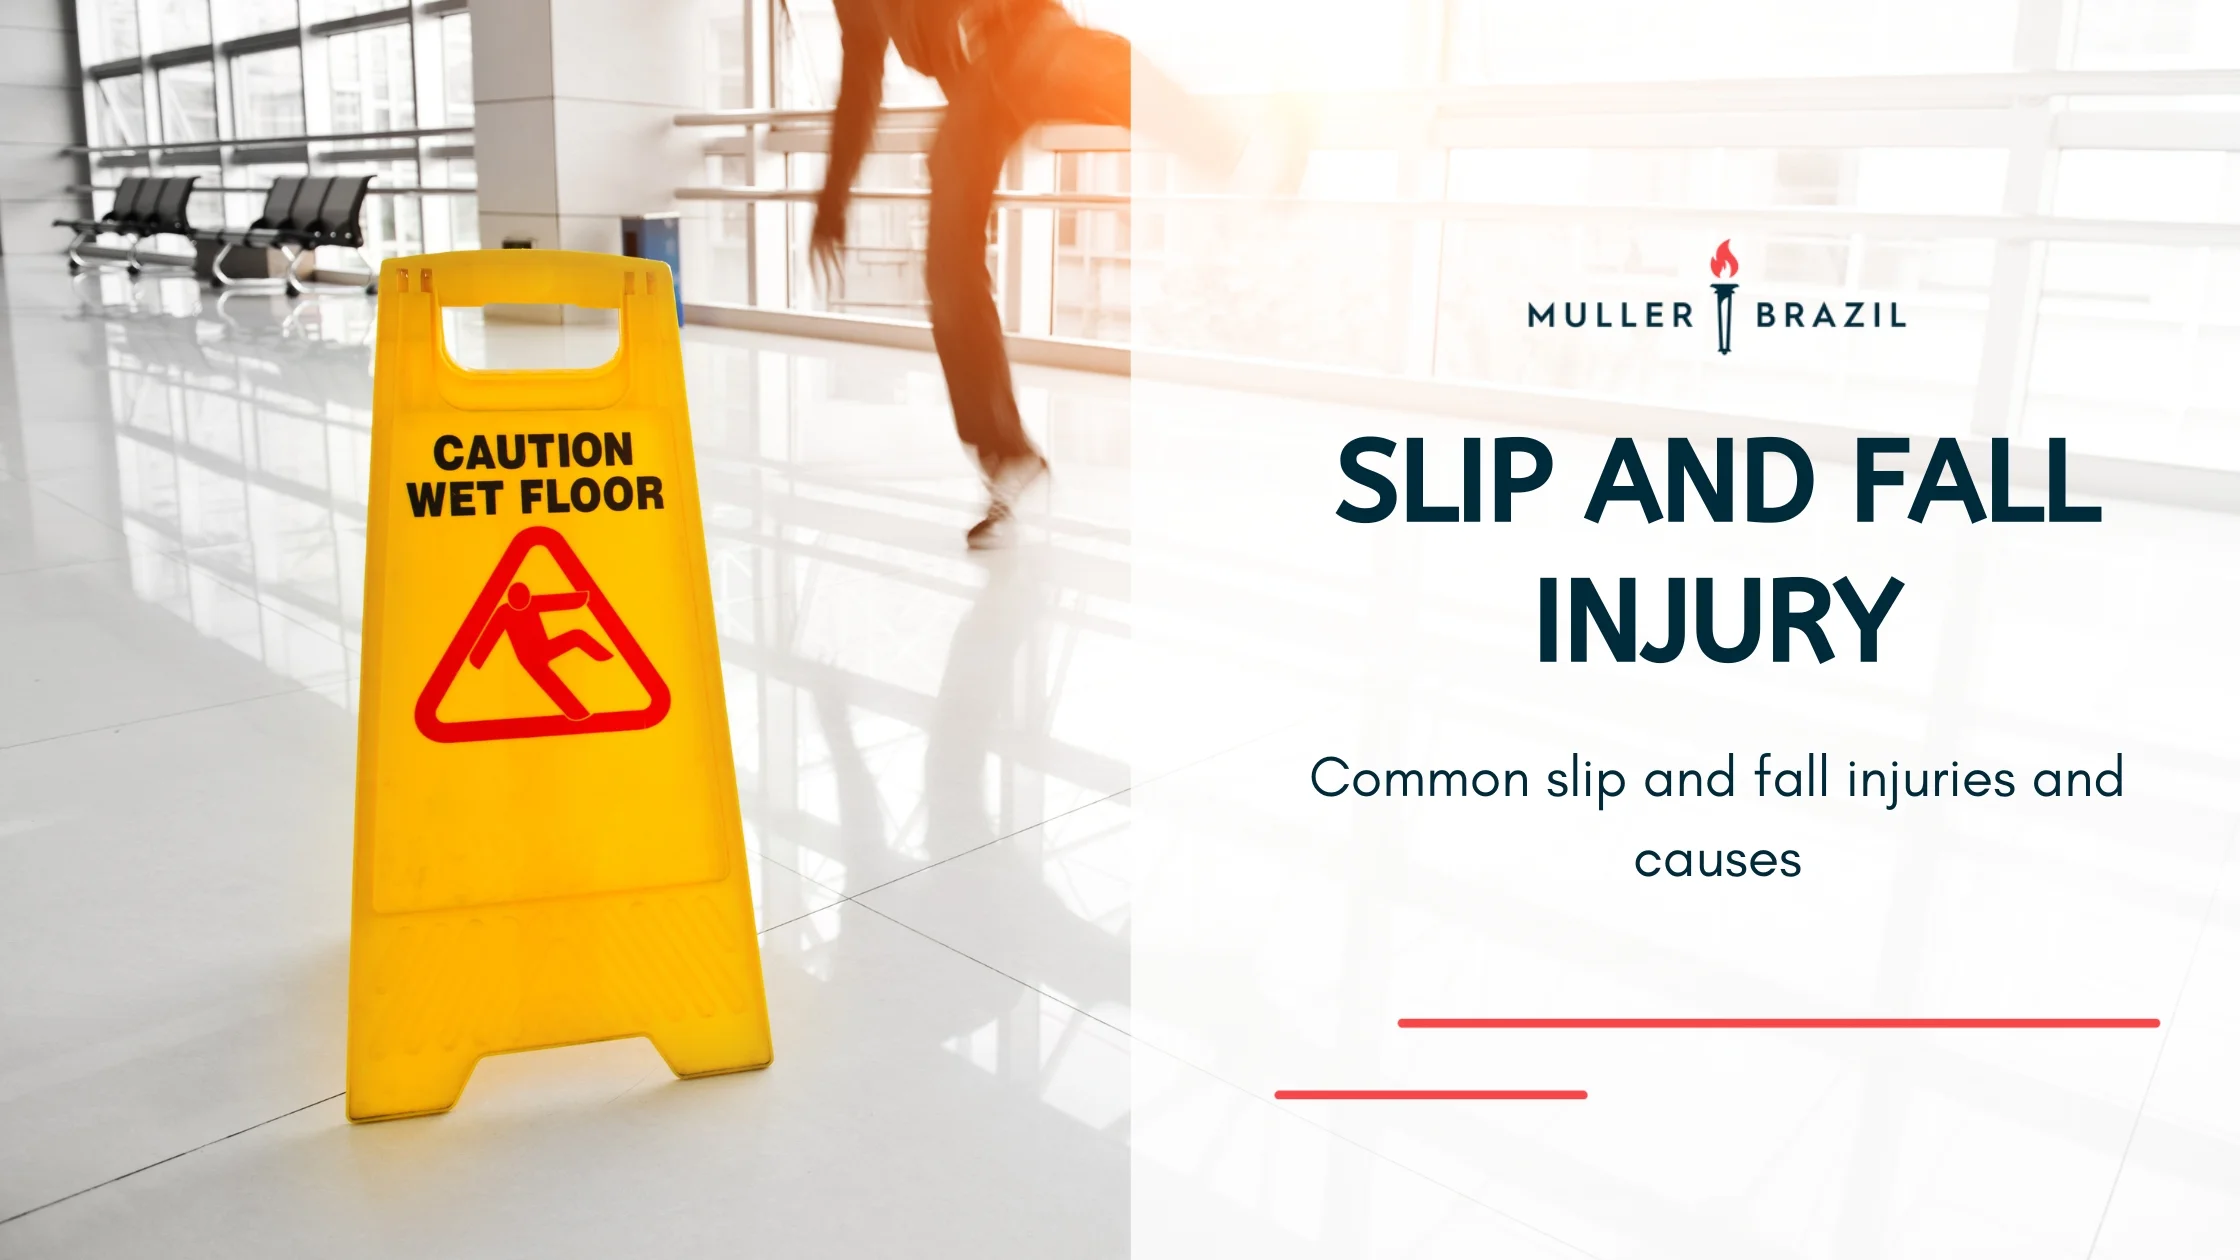 Blog featured image of a yellow caution wet floor sign in a hallway and a caption that says “Slip and Fall Injury“